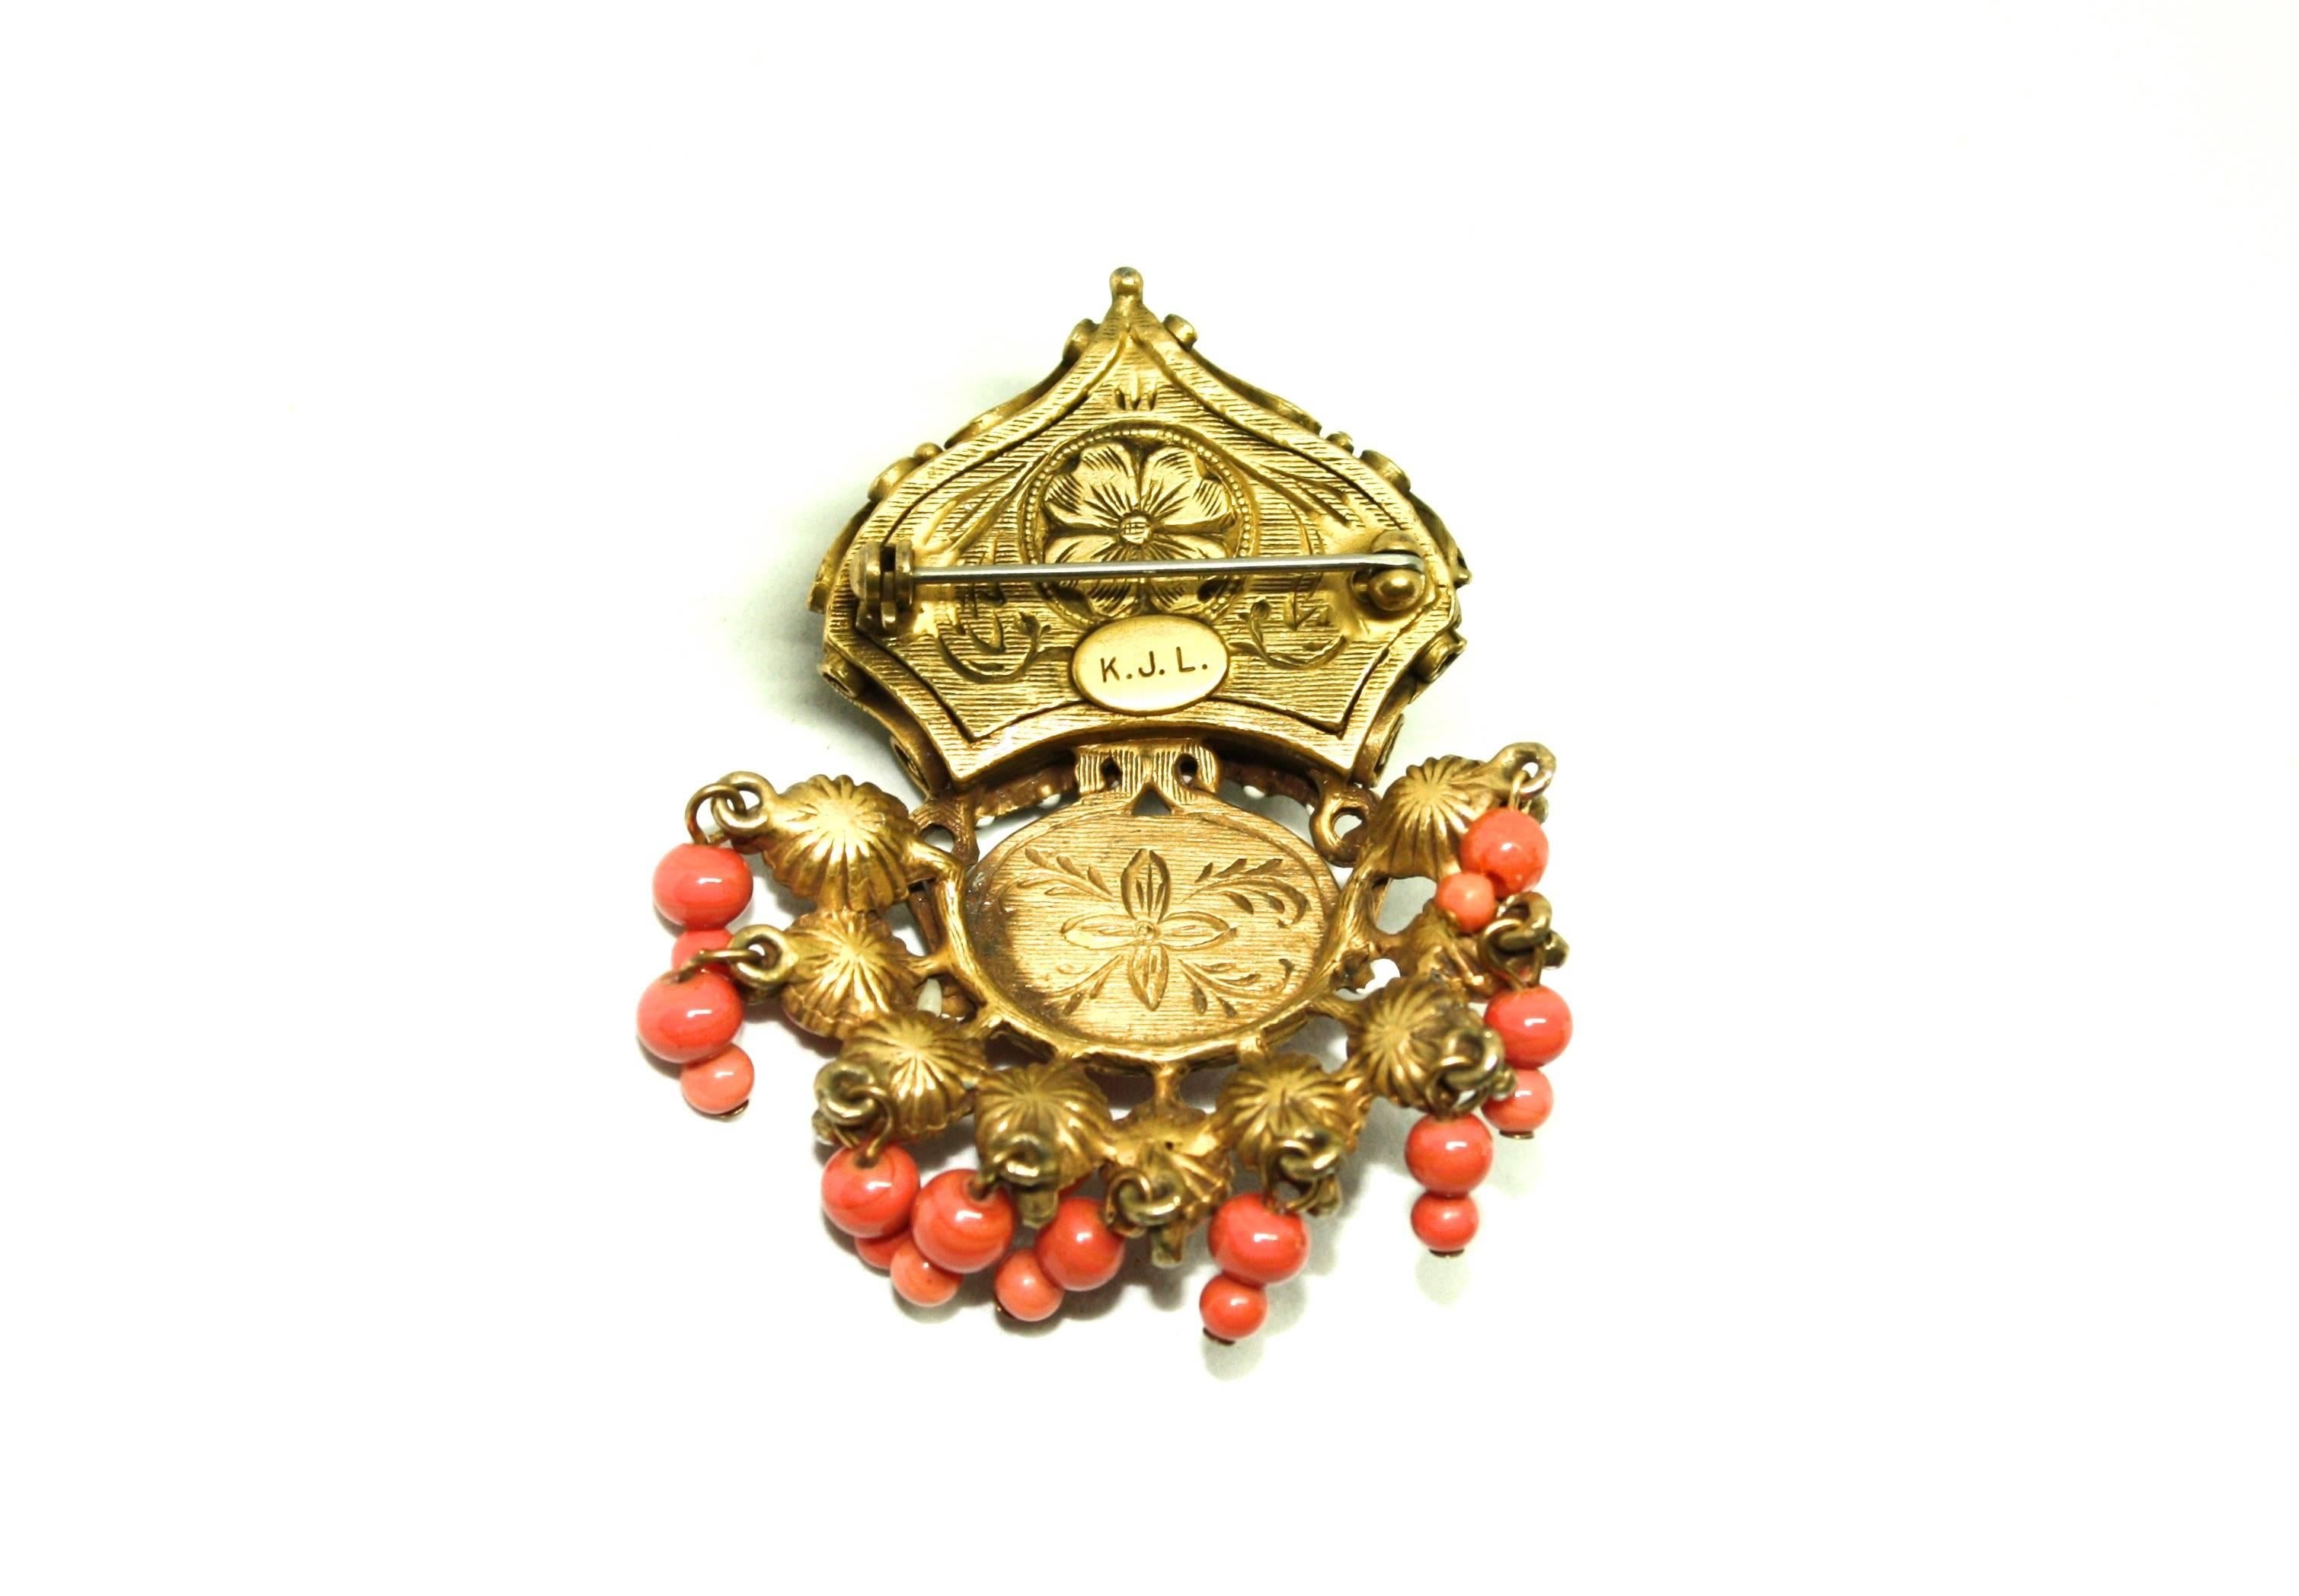 Gorgeous coral colour stones on antiqued metal featuring white enamel accents. This brooch also features articulated drop coral colour beads and is extremely detailed, even on the reverse! It is one of Ken Lane's earliest pieces, featuring the K.J.L